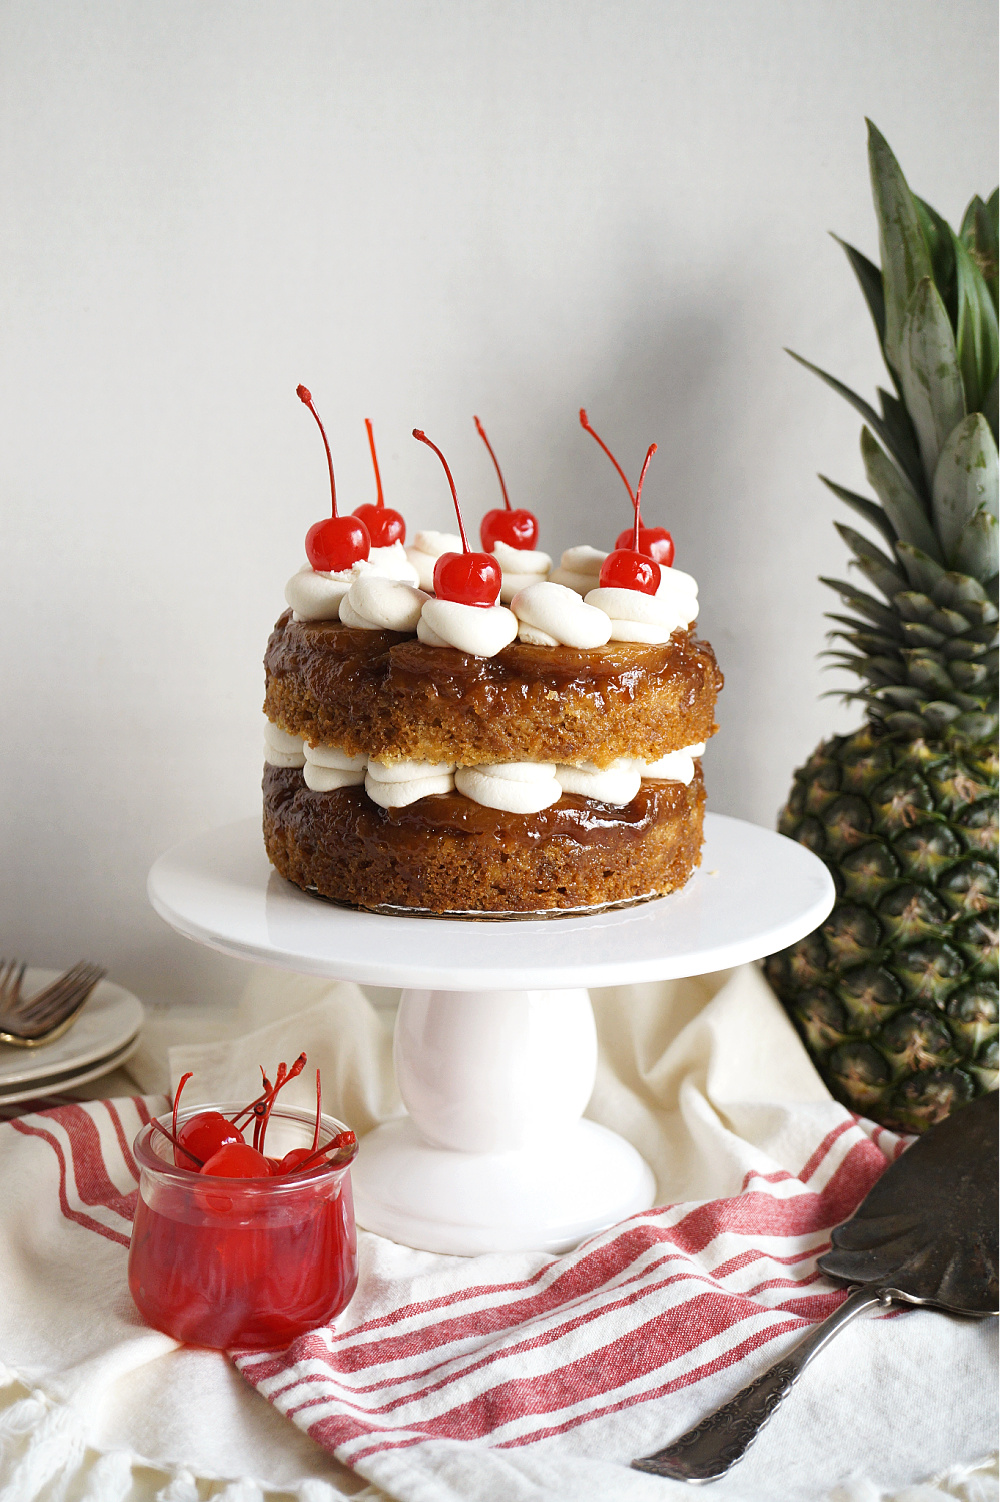 Pineapple Cake - French Bread Cakes & Pastries